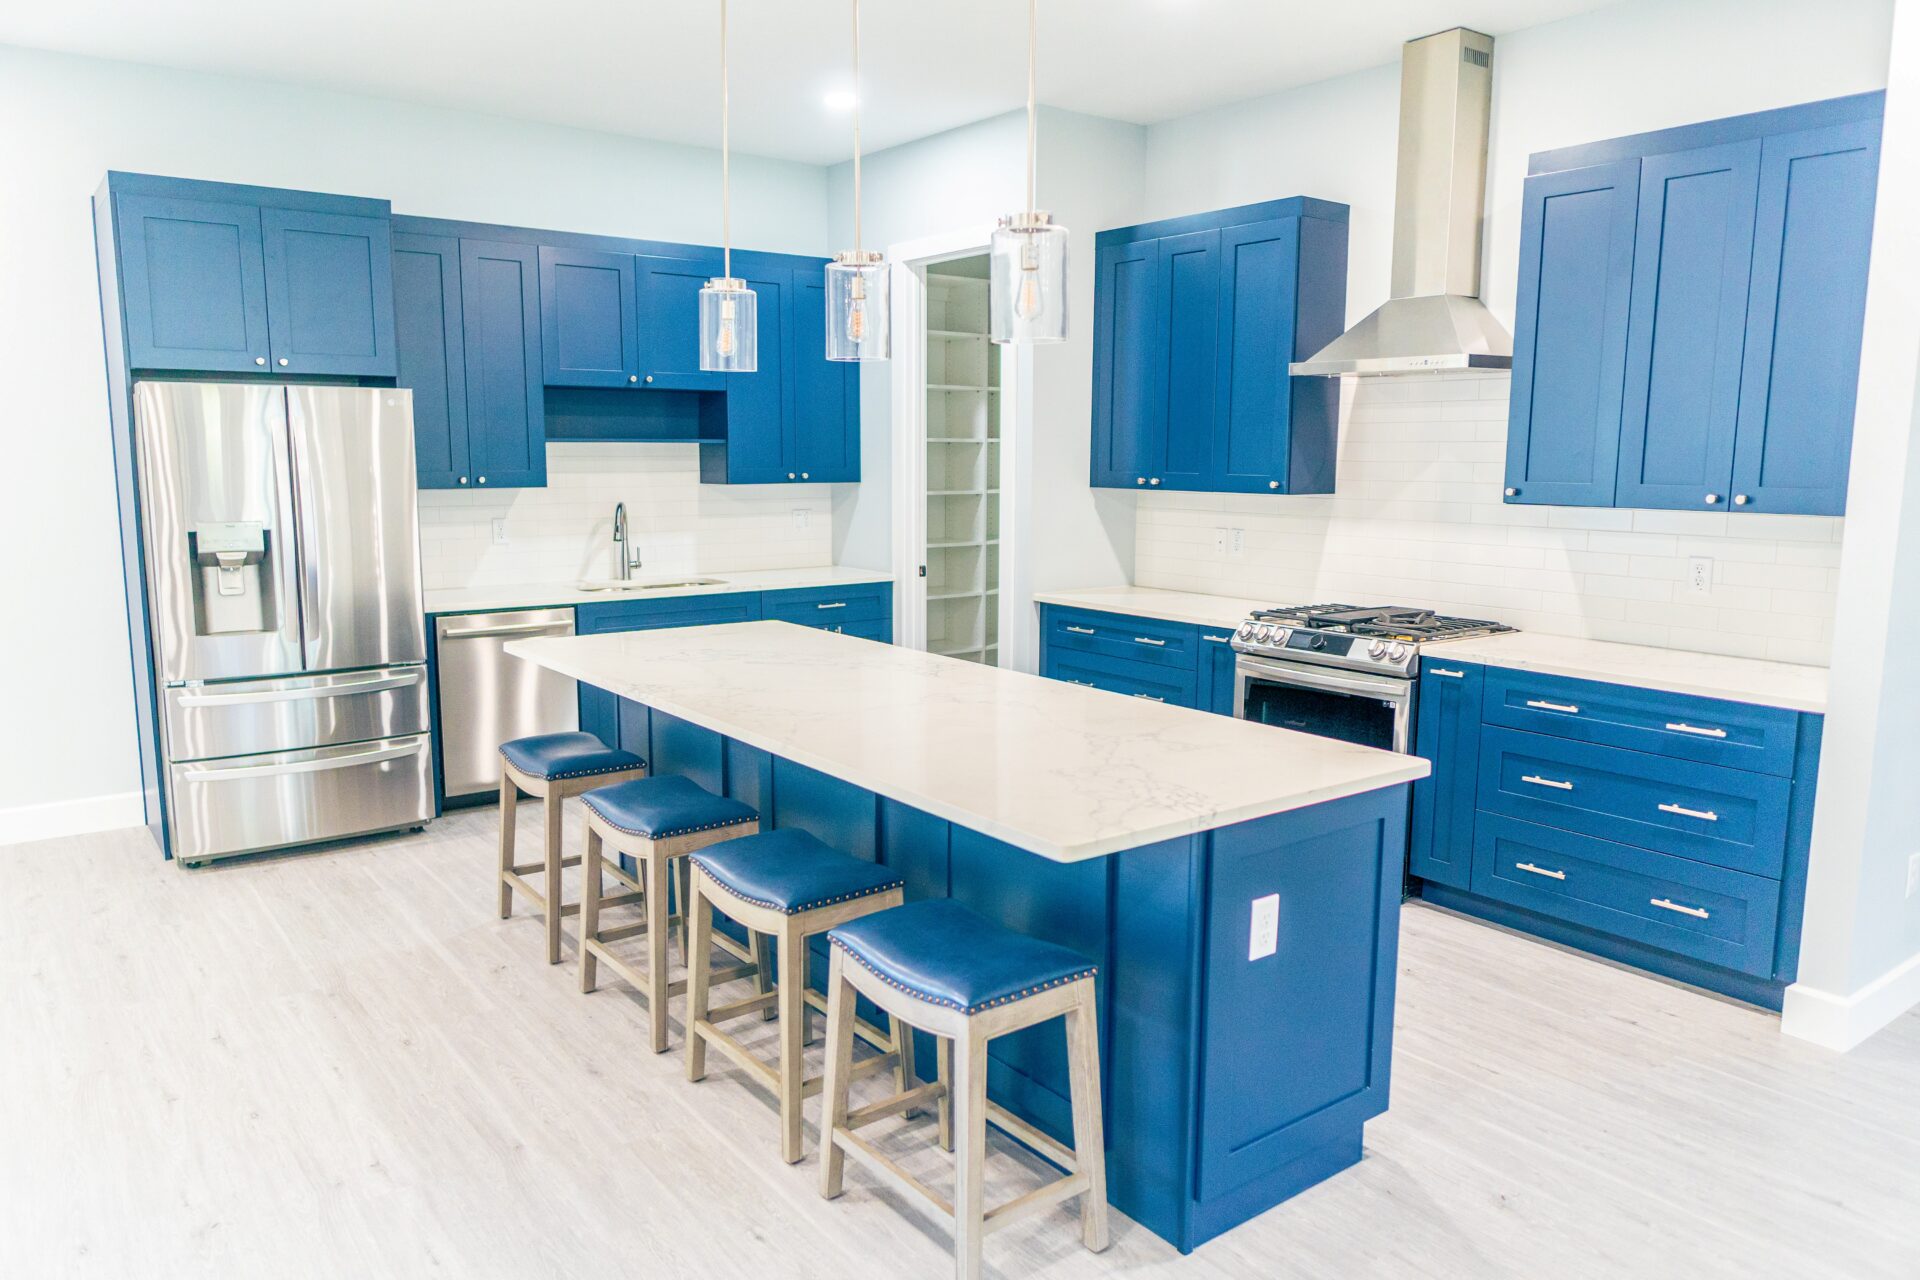 Kitchen with blue chairs